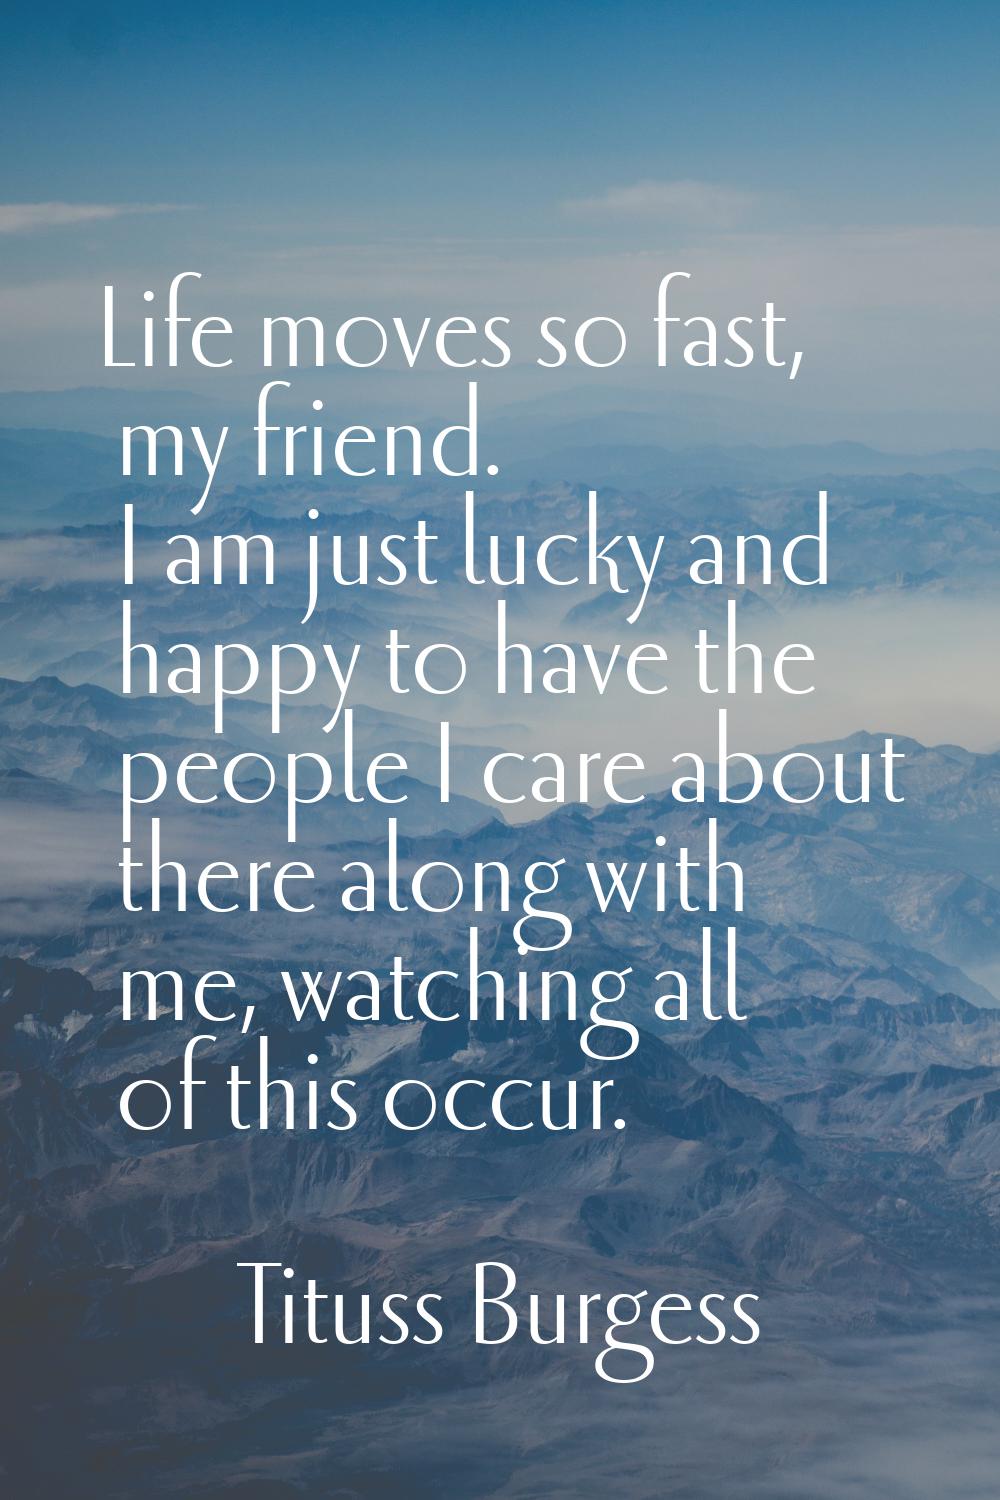 Life moves so fast, my friend. I am just lucky and happy to have the people I care about there alon